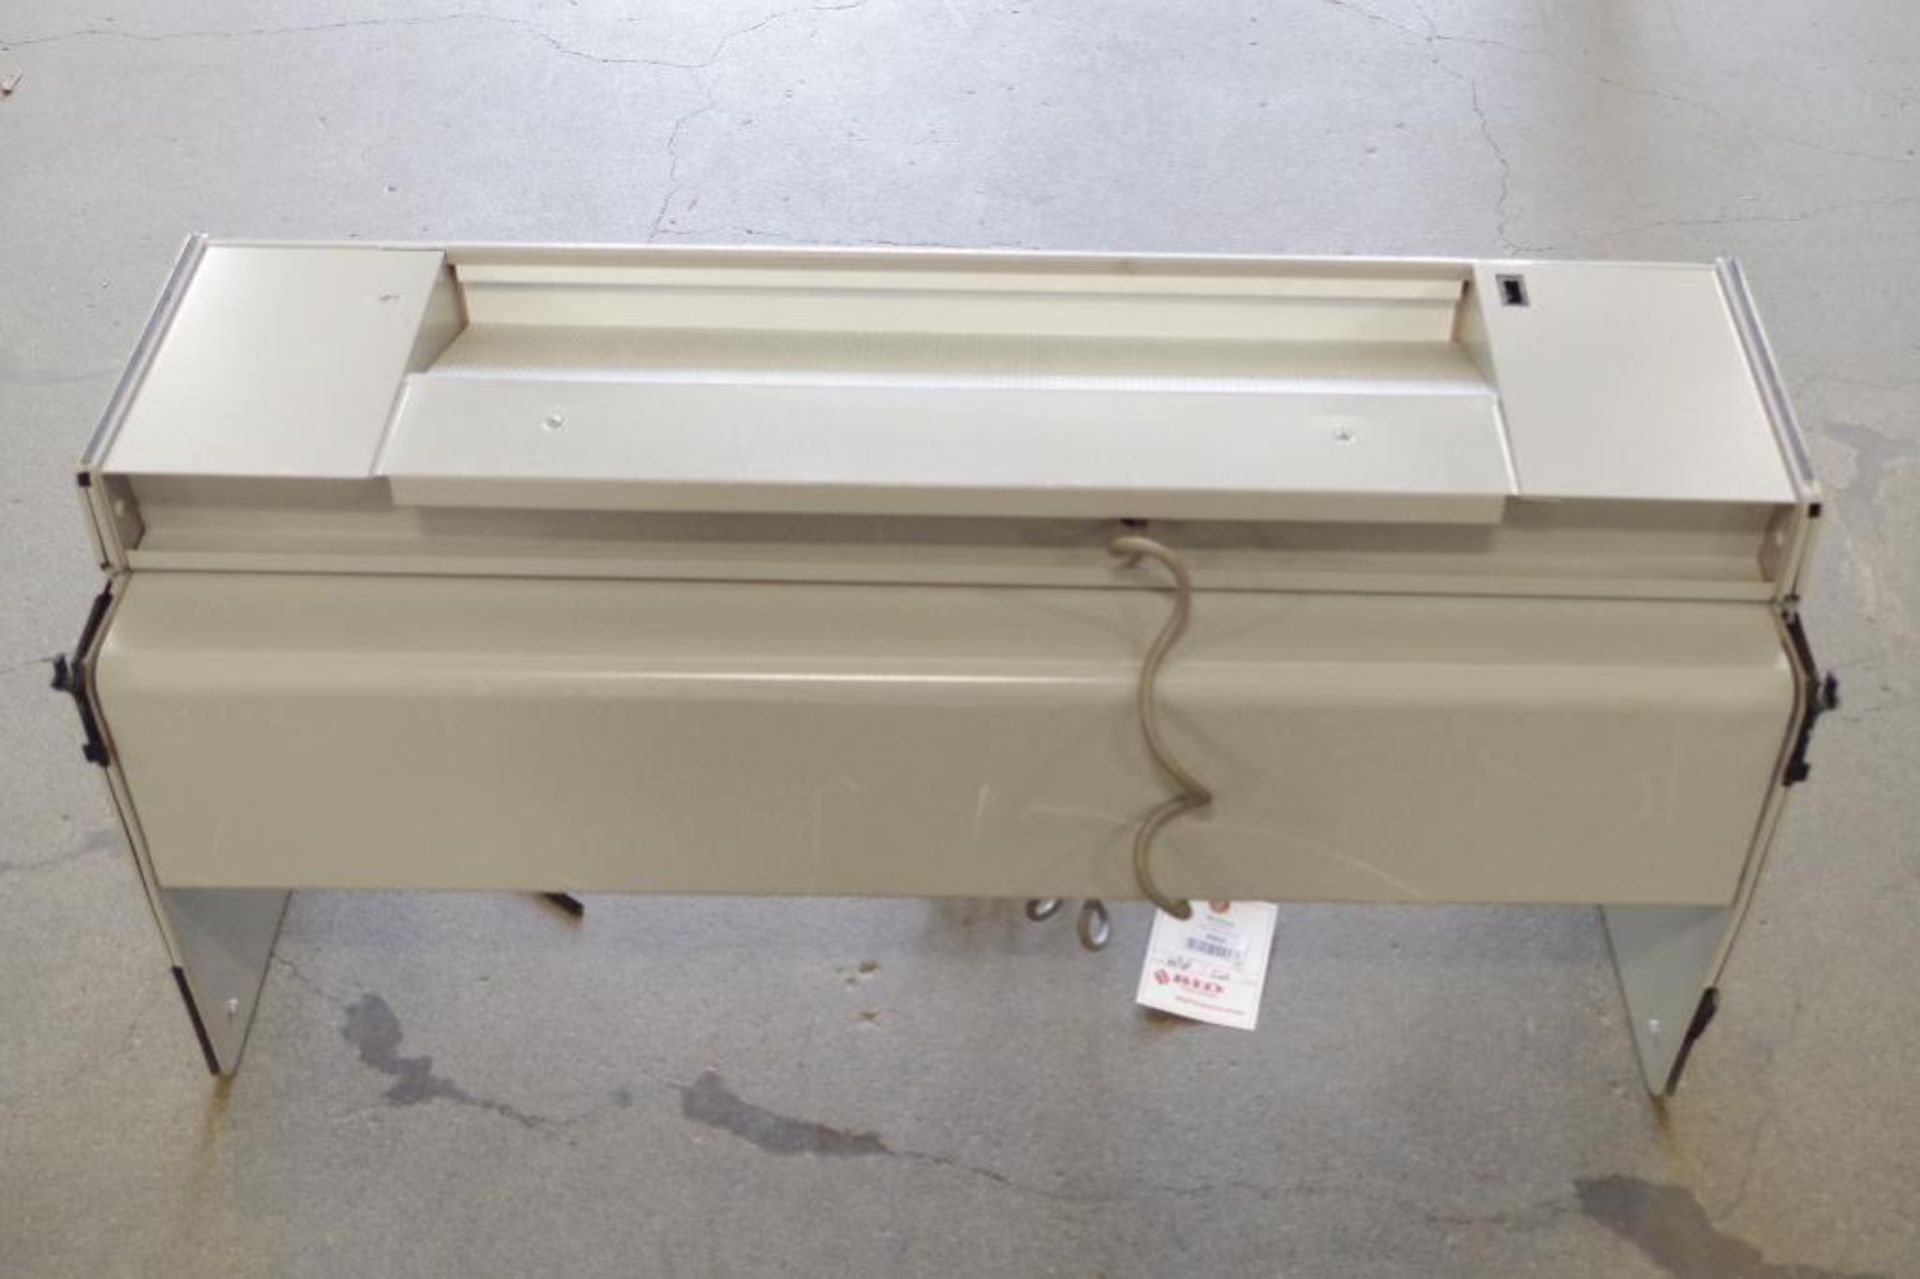 Fluorescent Light Fixture Approx. 36"L x 14"D x 17"H (Condition Unknown) - Image 4 of 4